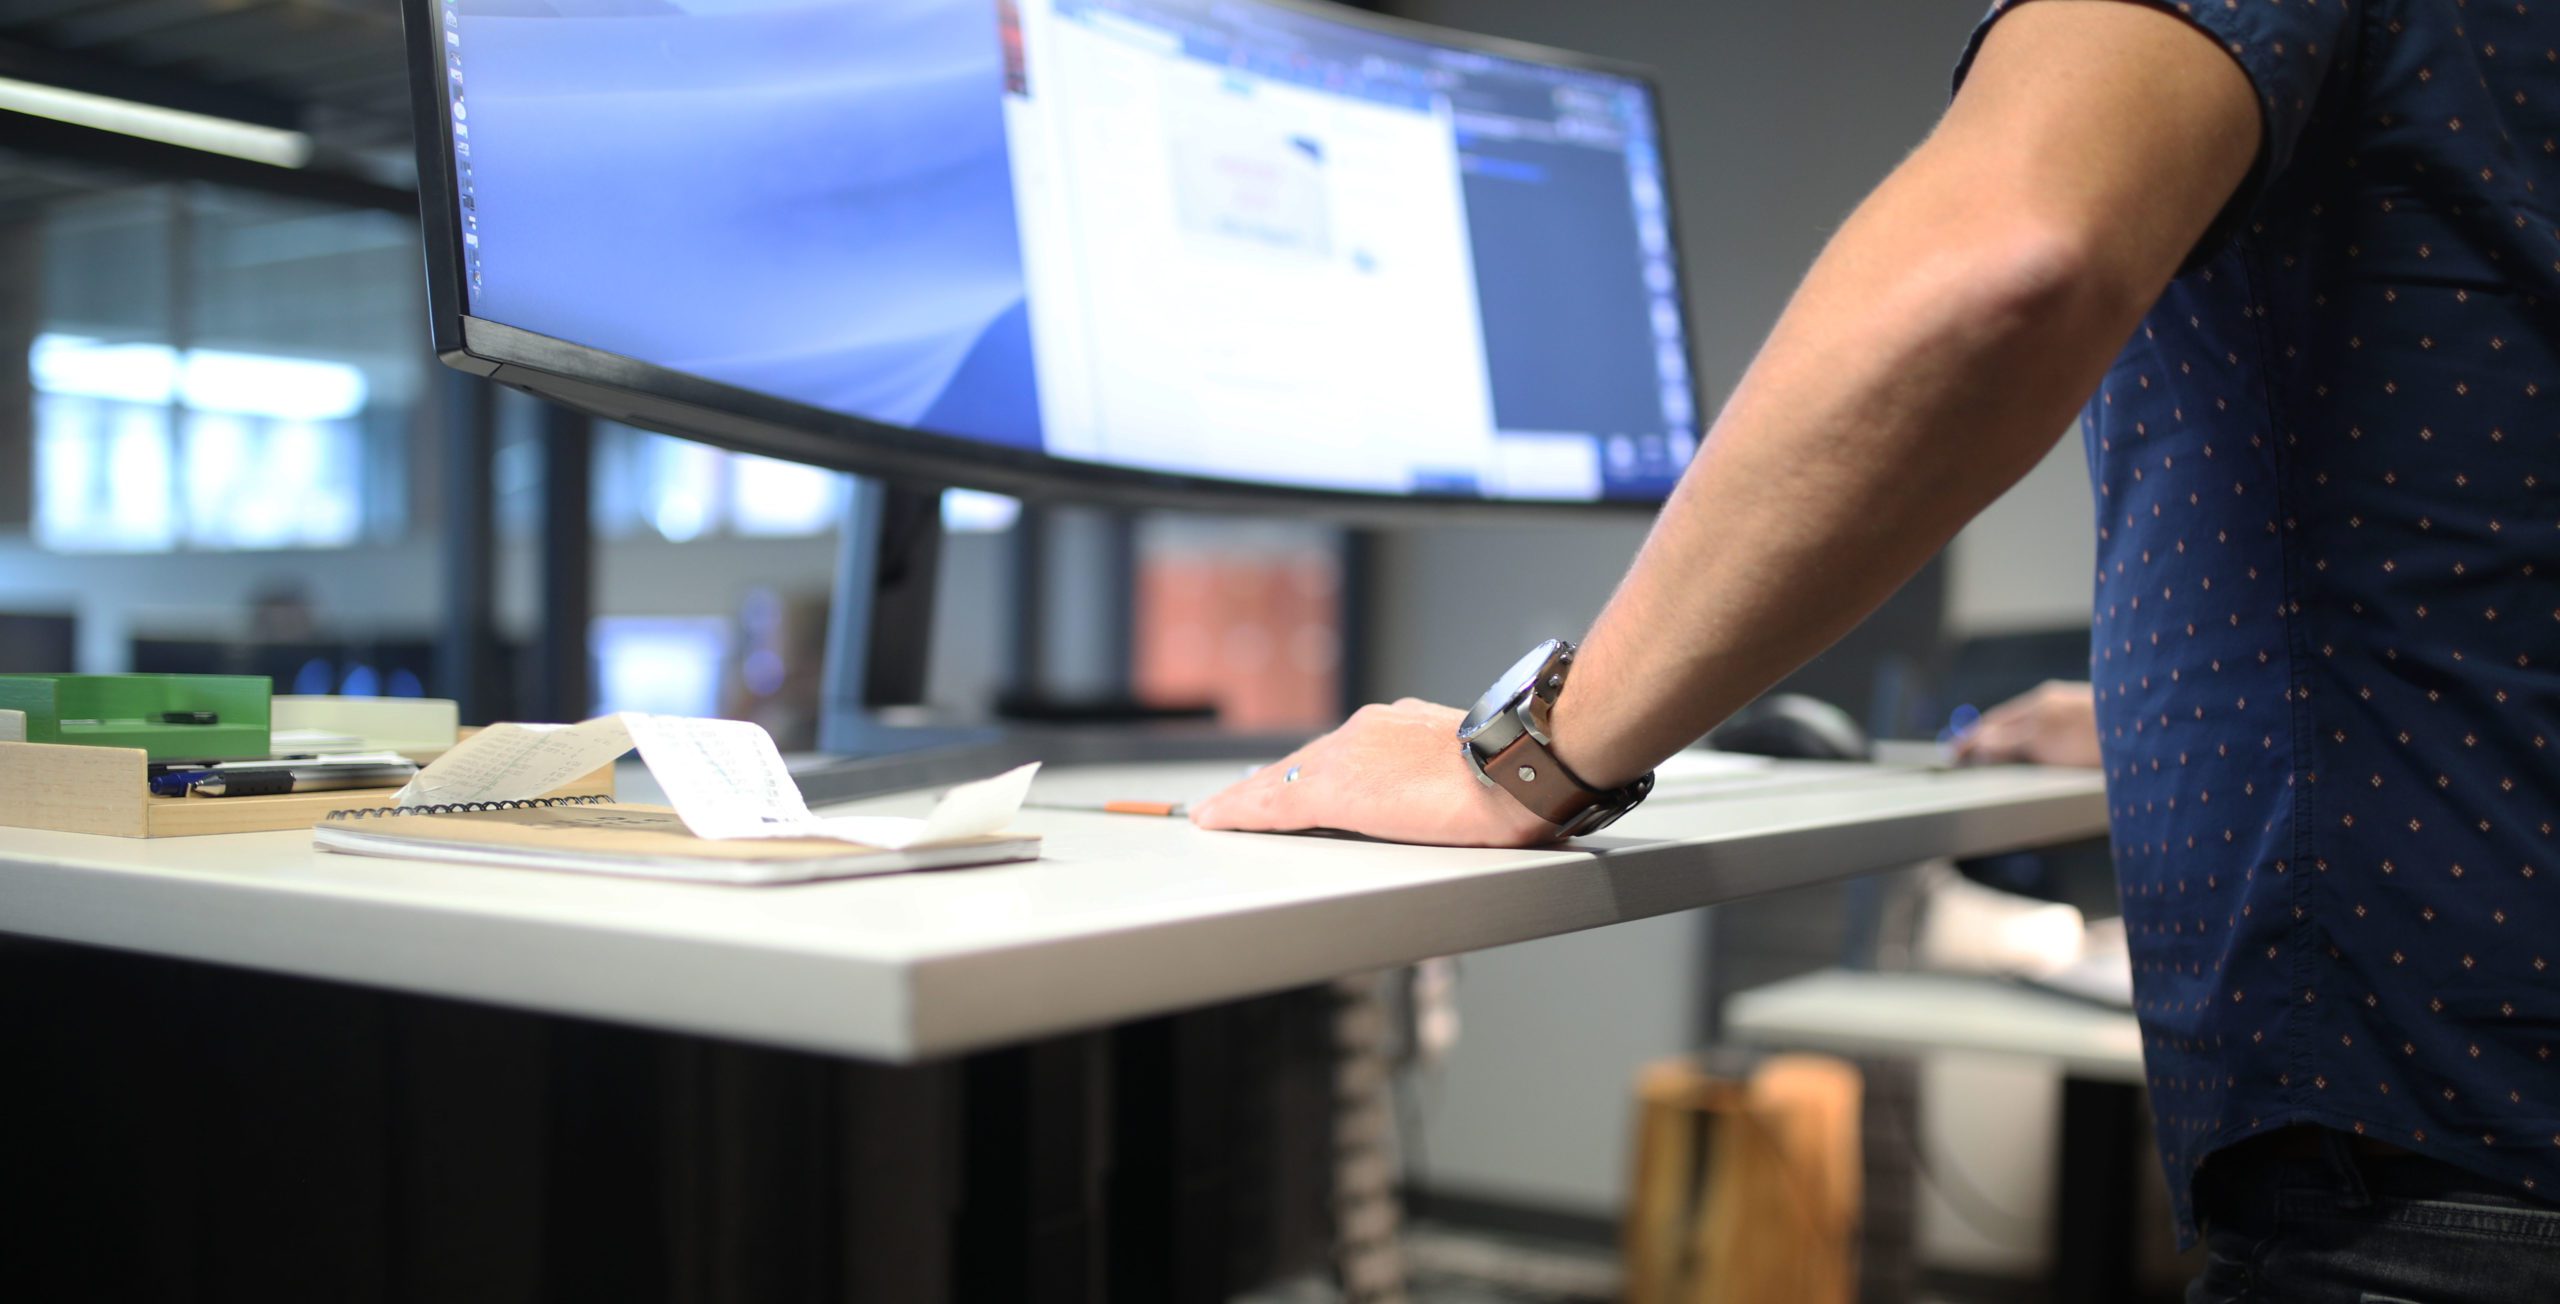 Standing Desks for Two Monitors or More